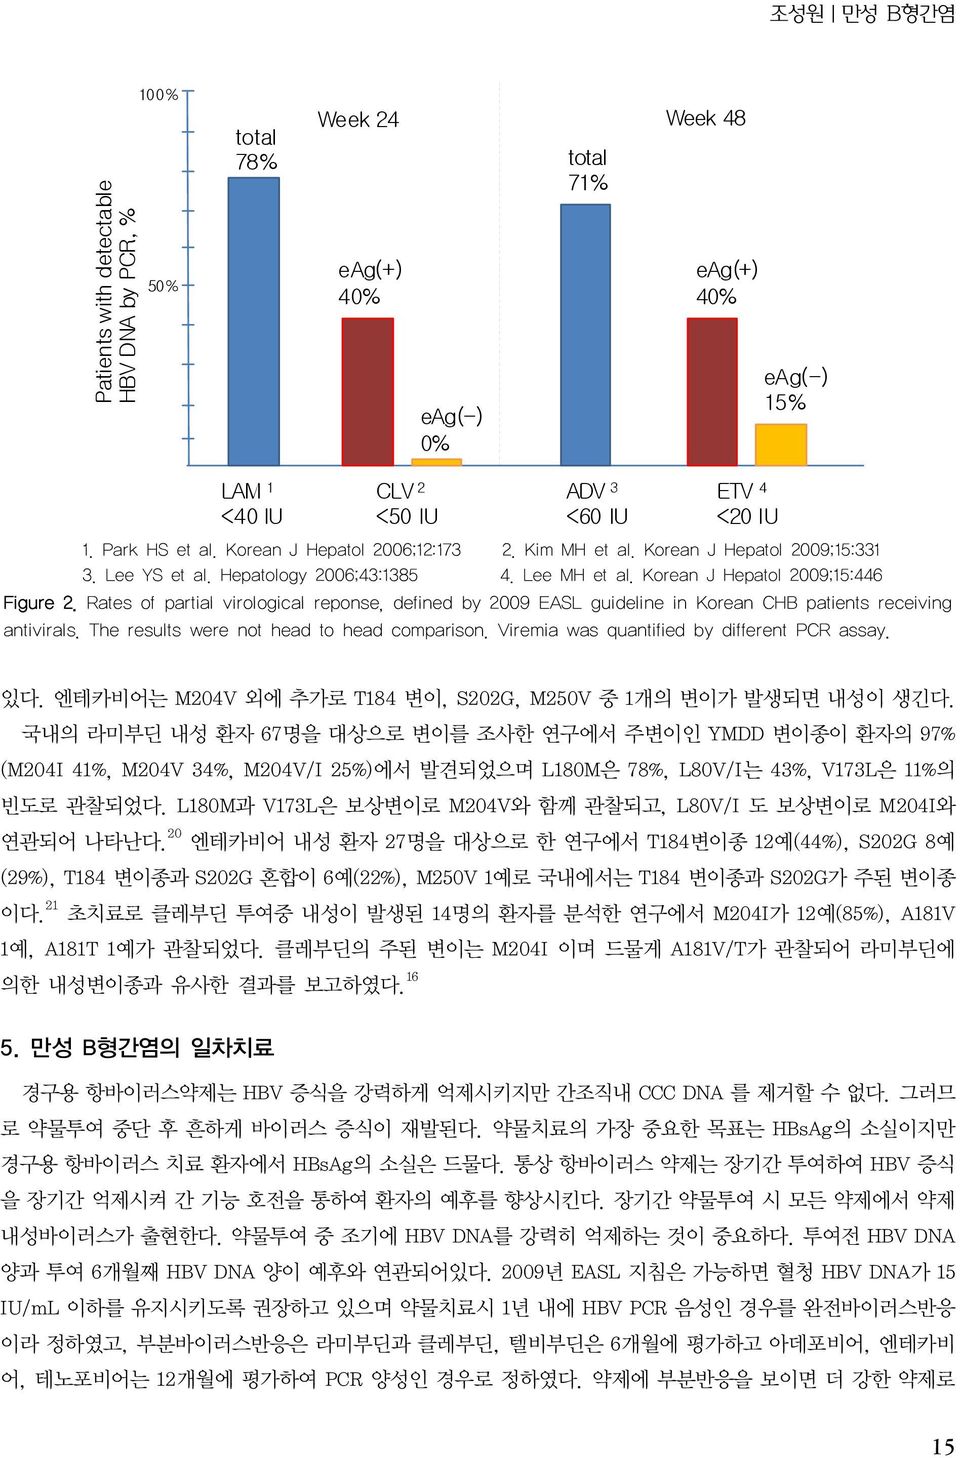 Rates of partial virological reponse, defined by 2009 EASL guideline in Korean CHB patients receiving antivirals. The results were not head to head comparison.